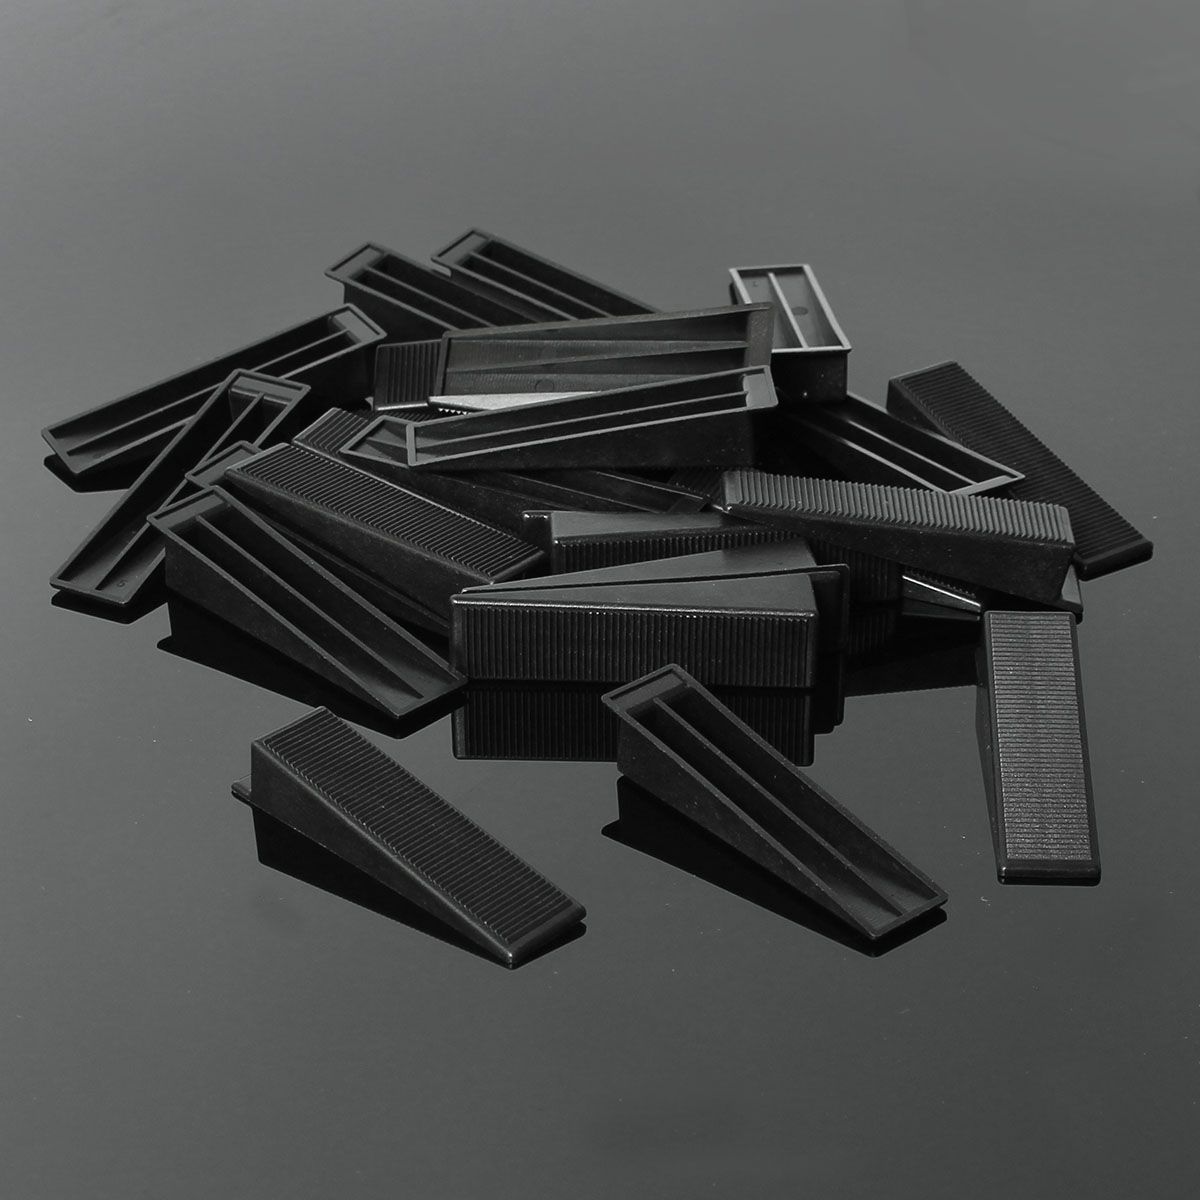 50Pcs-Black-Tile-Flat-Leveling-System-Wedges-Clips-Wall-Floor-Spacers-Strap-Device-Tools-1427127